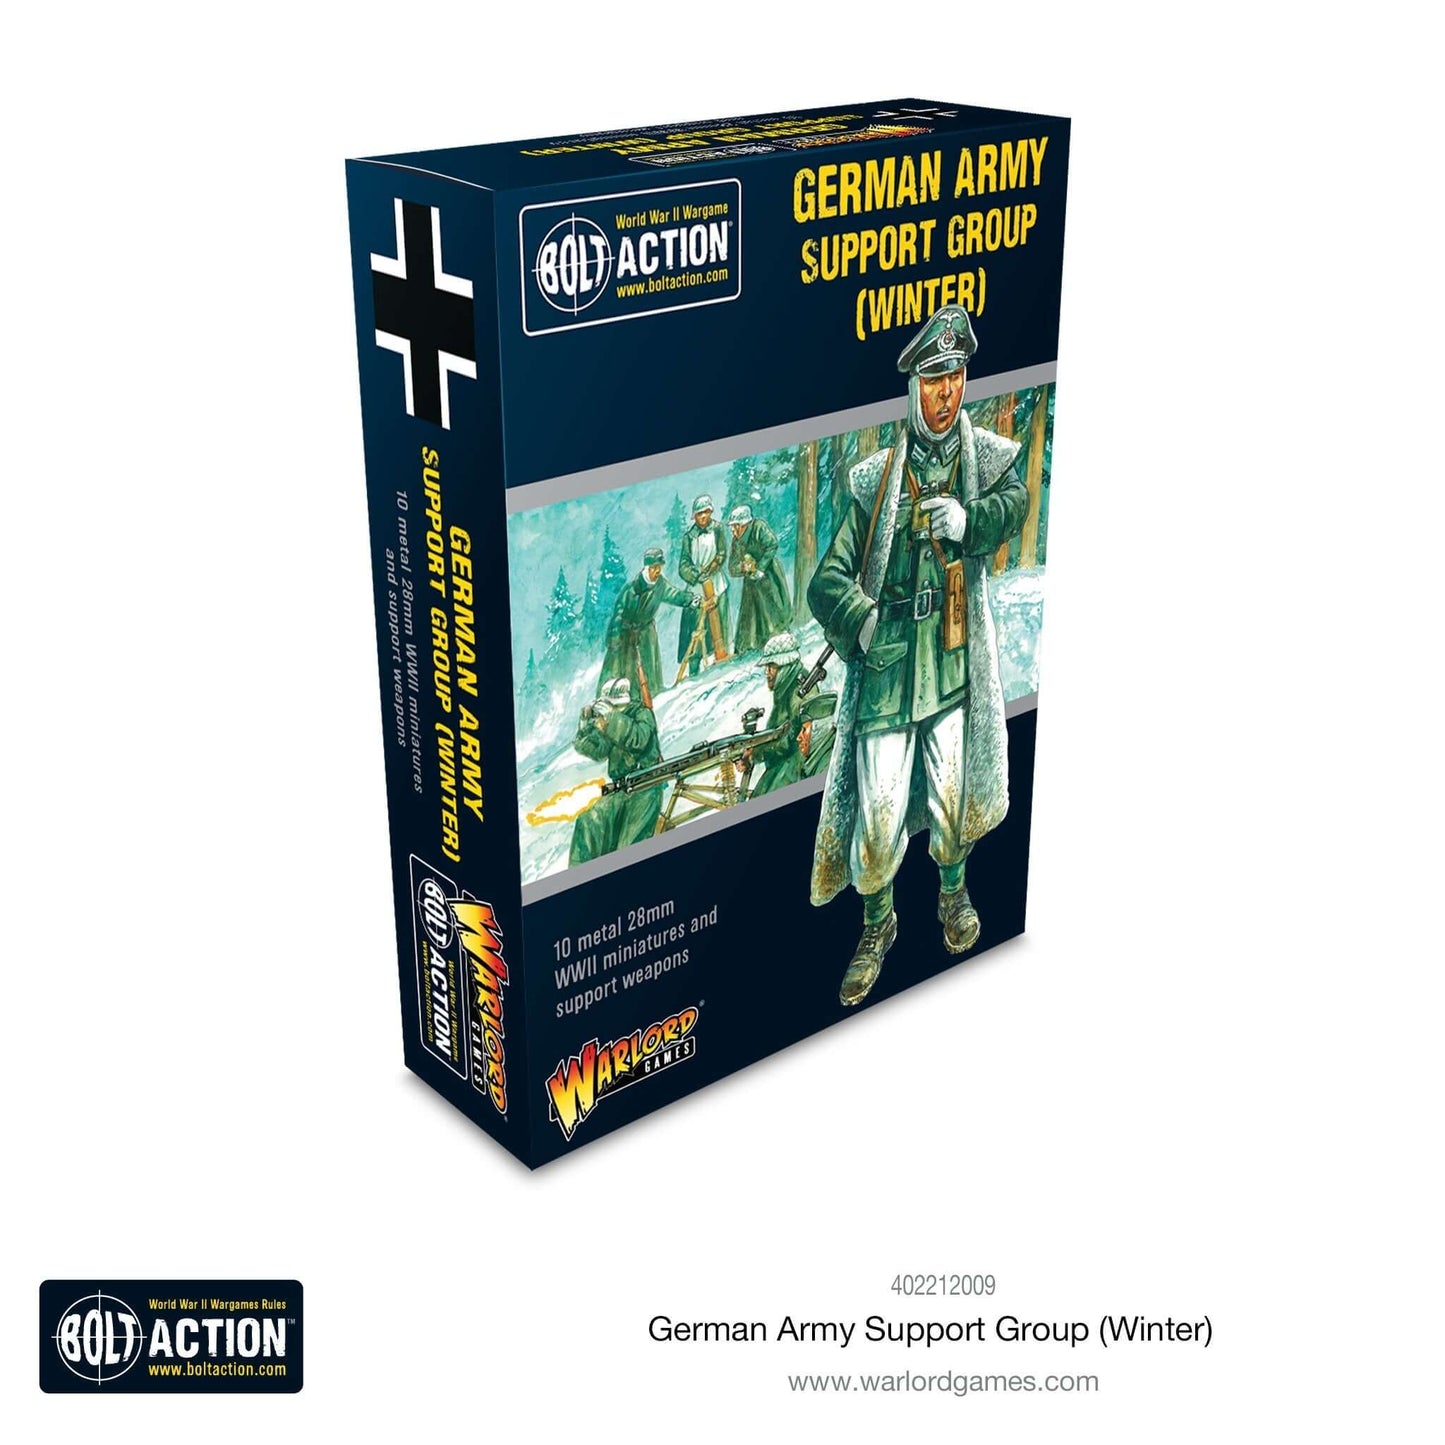 German Army (Winter) Support Group Bolt Action WARLORD